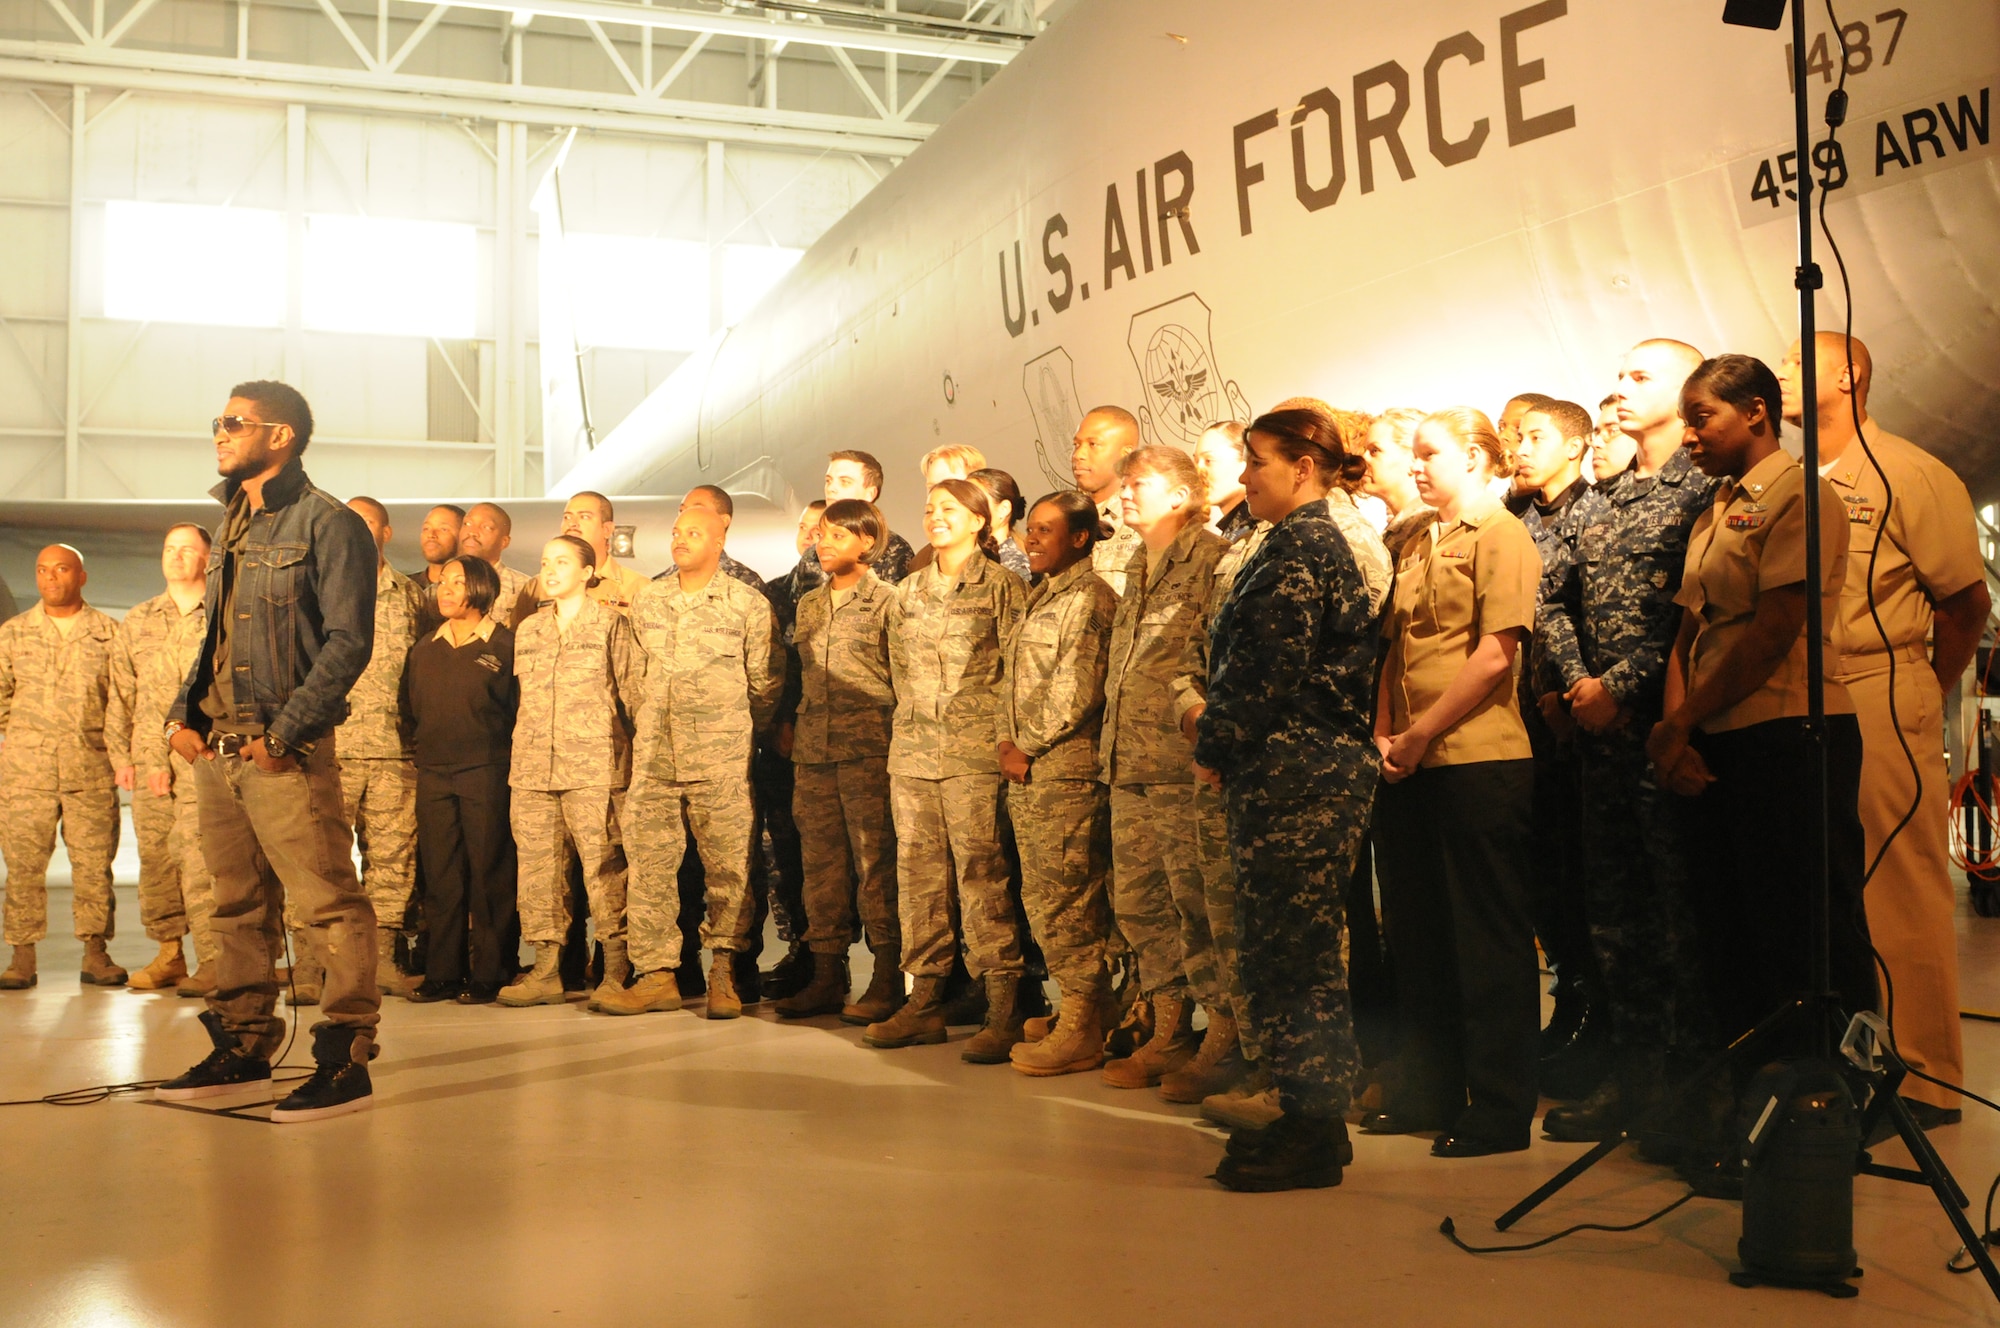 JOINT BASE ANDREWS, Md. -- R&B artist, Usher, records a Public Service Announcement with servcemembers stationed here Dec. 17. Along with recording the PSA, Usher also toured a KC-135 Stratotanker from the 459th Air Refueling Wing and other facilities on base. Later that evening he performed in a concert at the Verizon Center in Washington DC. (U.S. Air Force photo/Tech. Sgt. Steve Lewis)